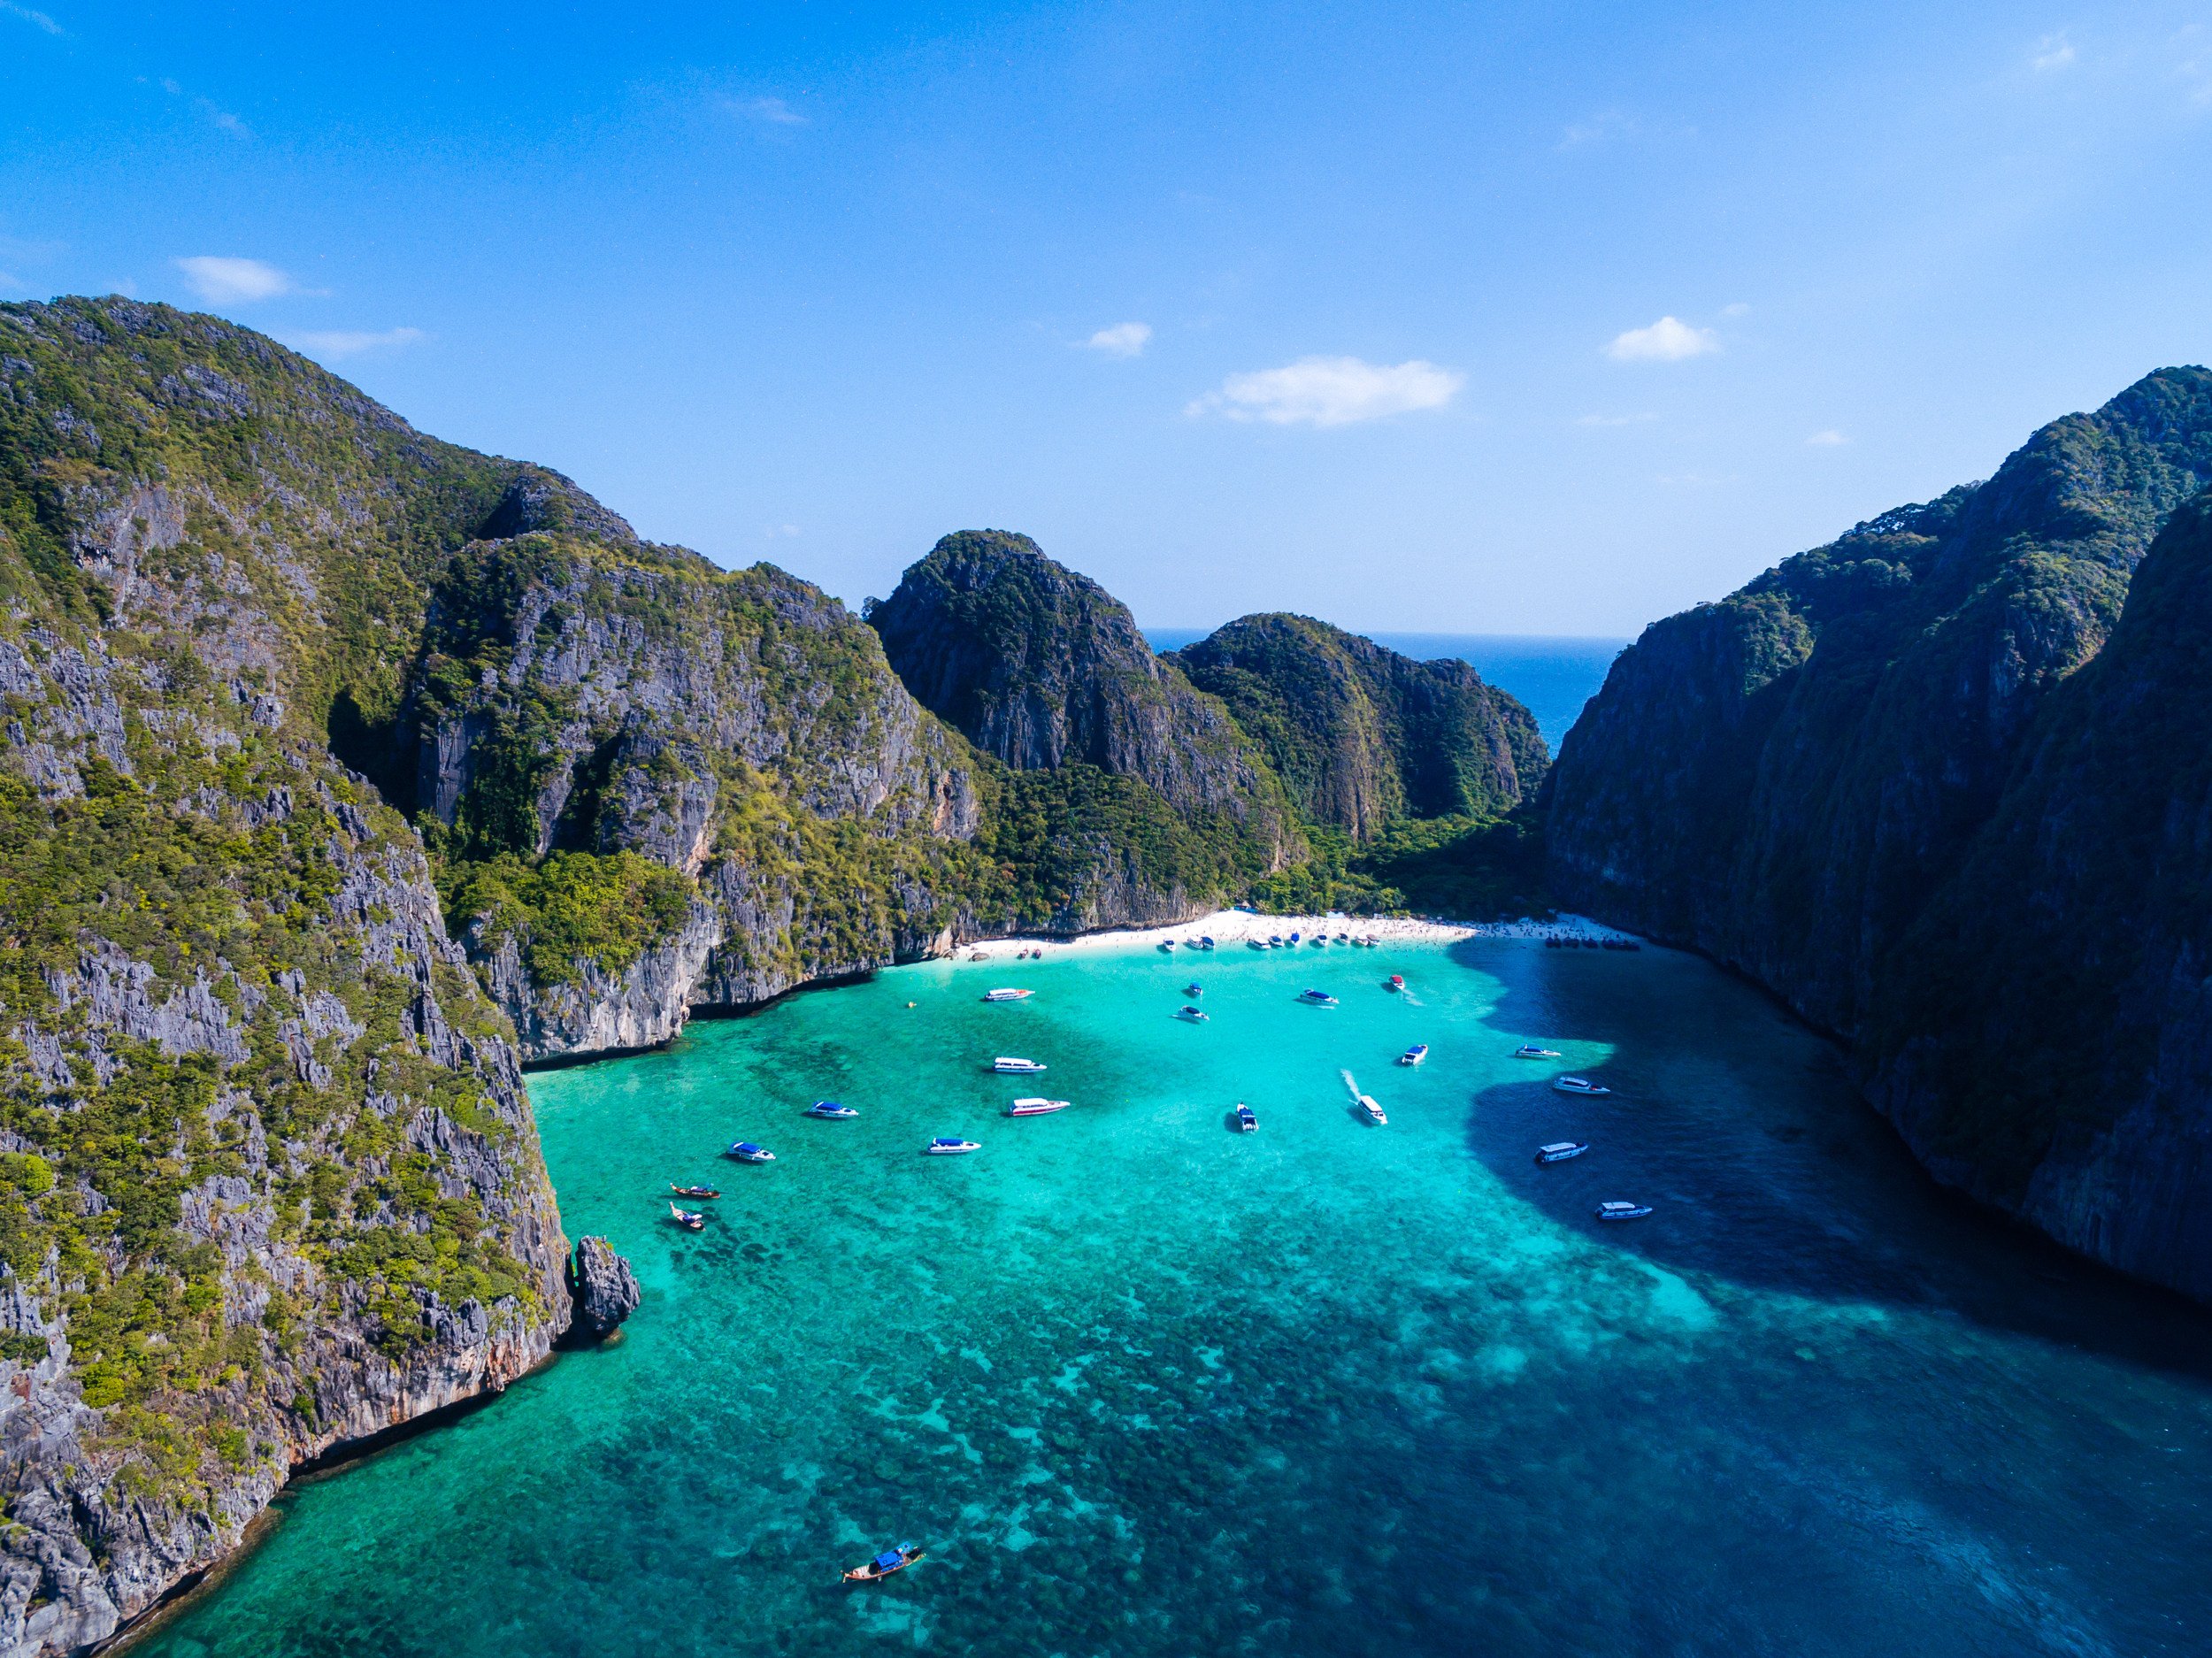 Maya Bay, in Thailand, was damaged as a result of Leonardo DiCaprio’s 2000 movie, The Beach. It’s since recovered, but will it stay this way? Photo: Shutterstock